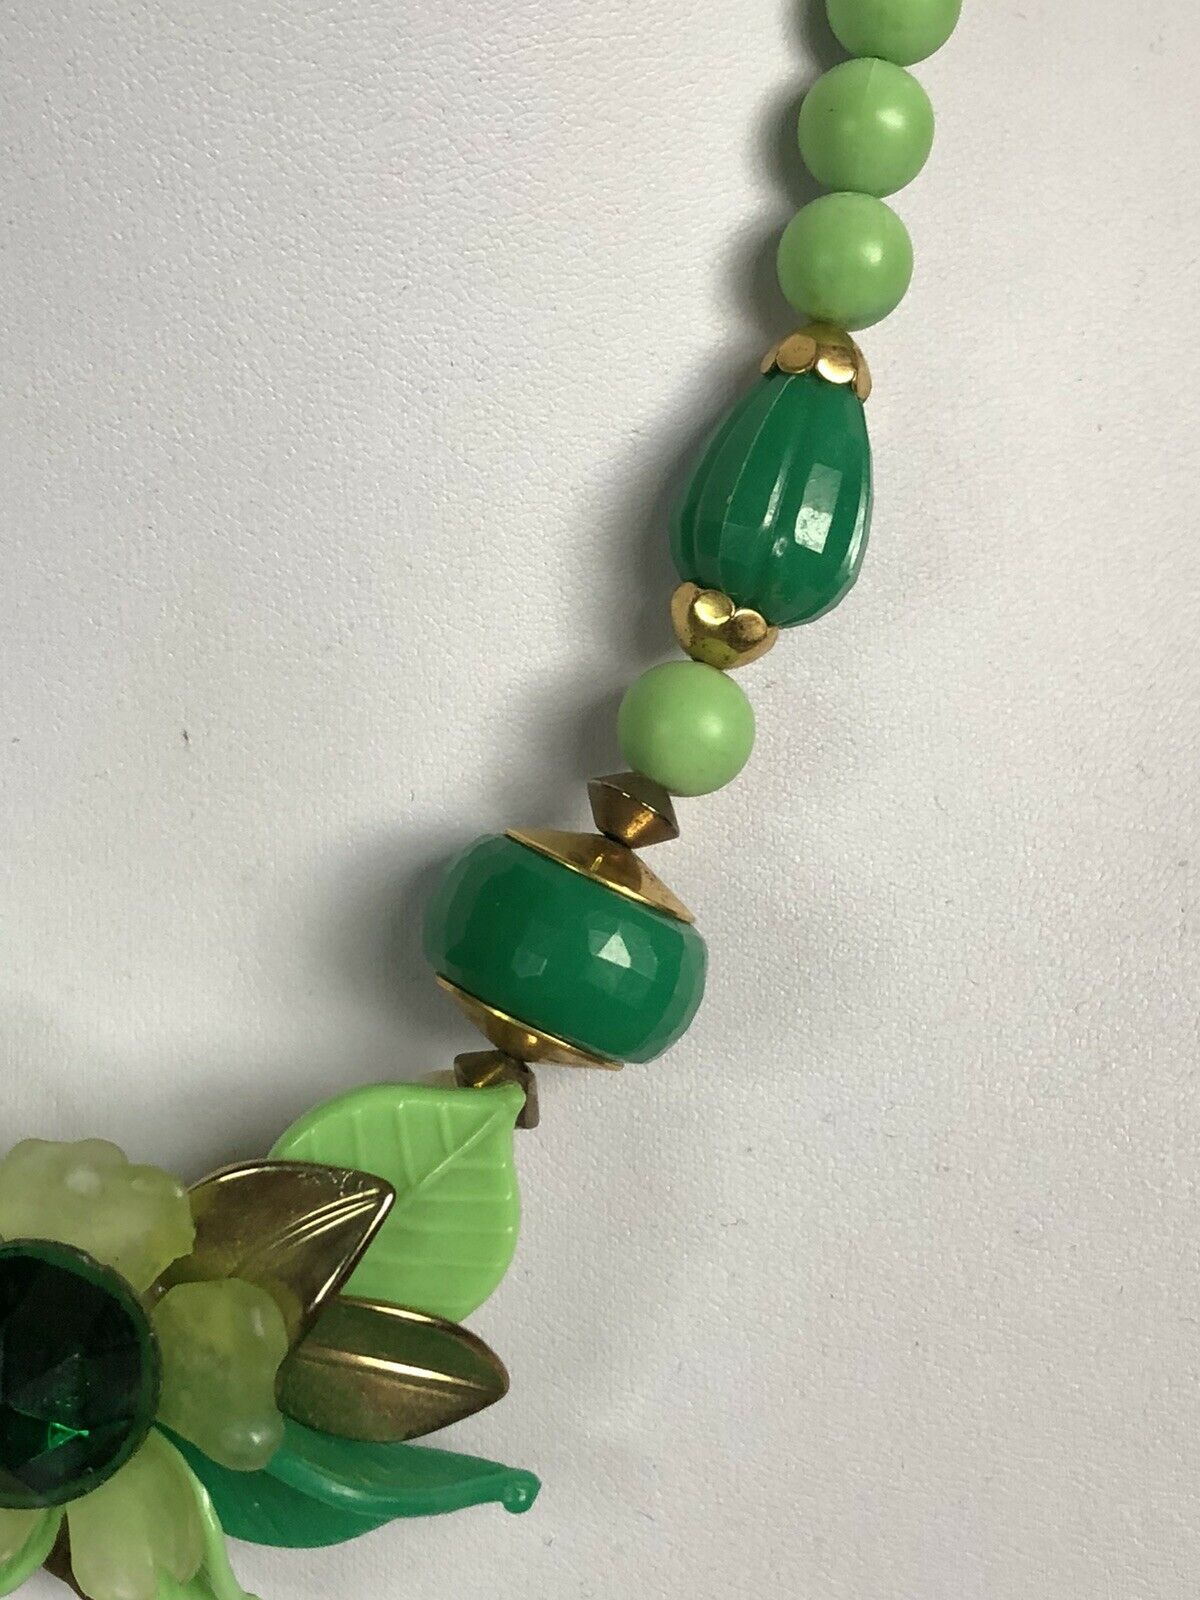 Vintage Signed Pierre Cardin Rare Runway Green Beaded Necklace